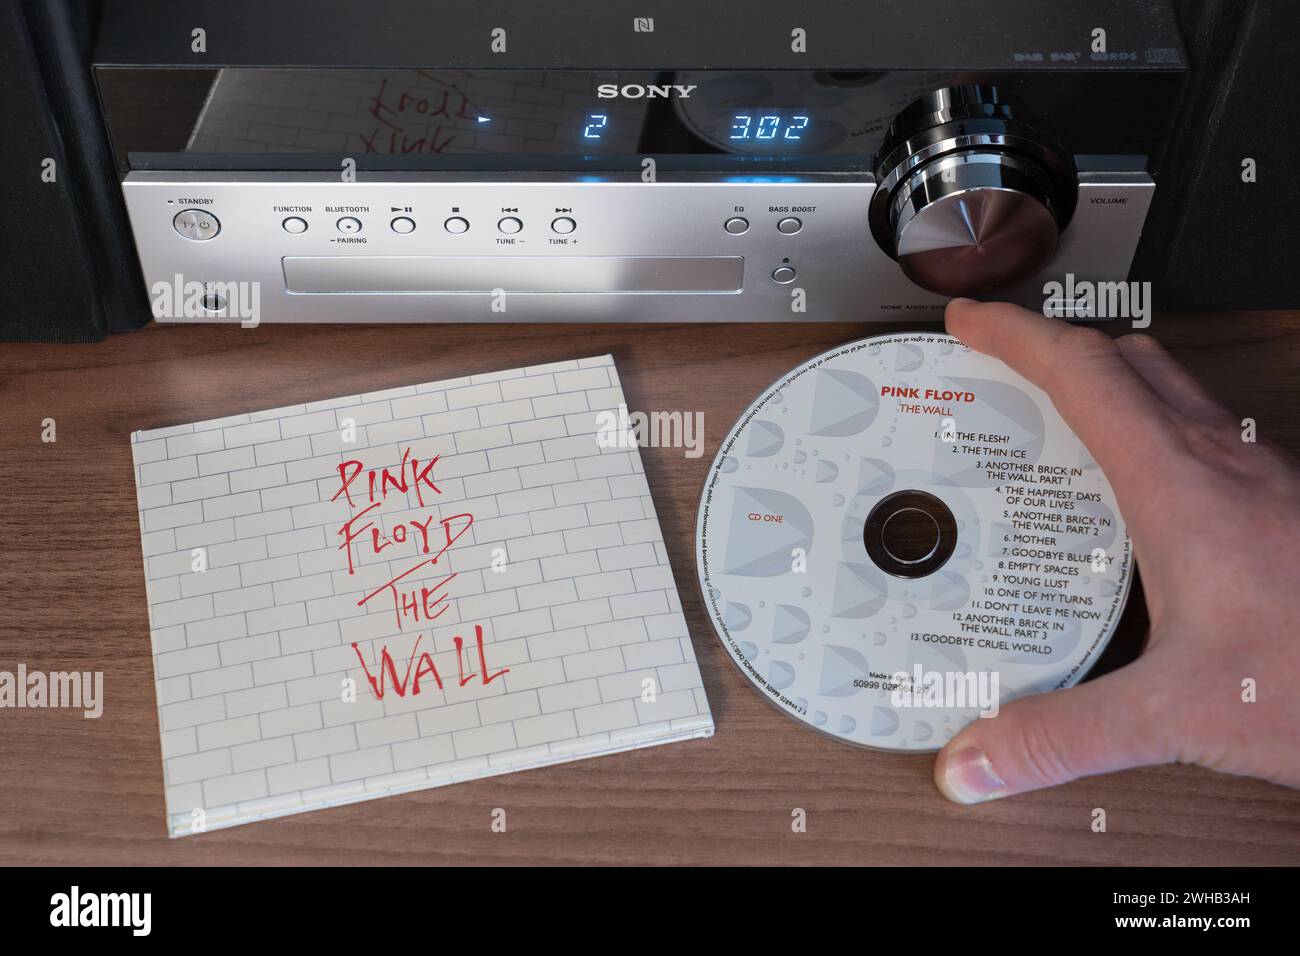 The Wall is the eleventh studio album by the English rock band Pink Floyd. It is a rock opera about Pink, a jaded rock star Stock Photo